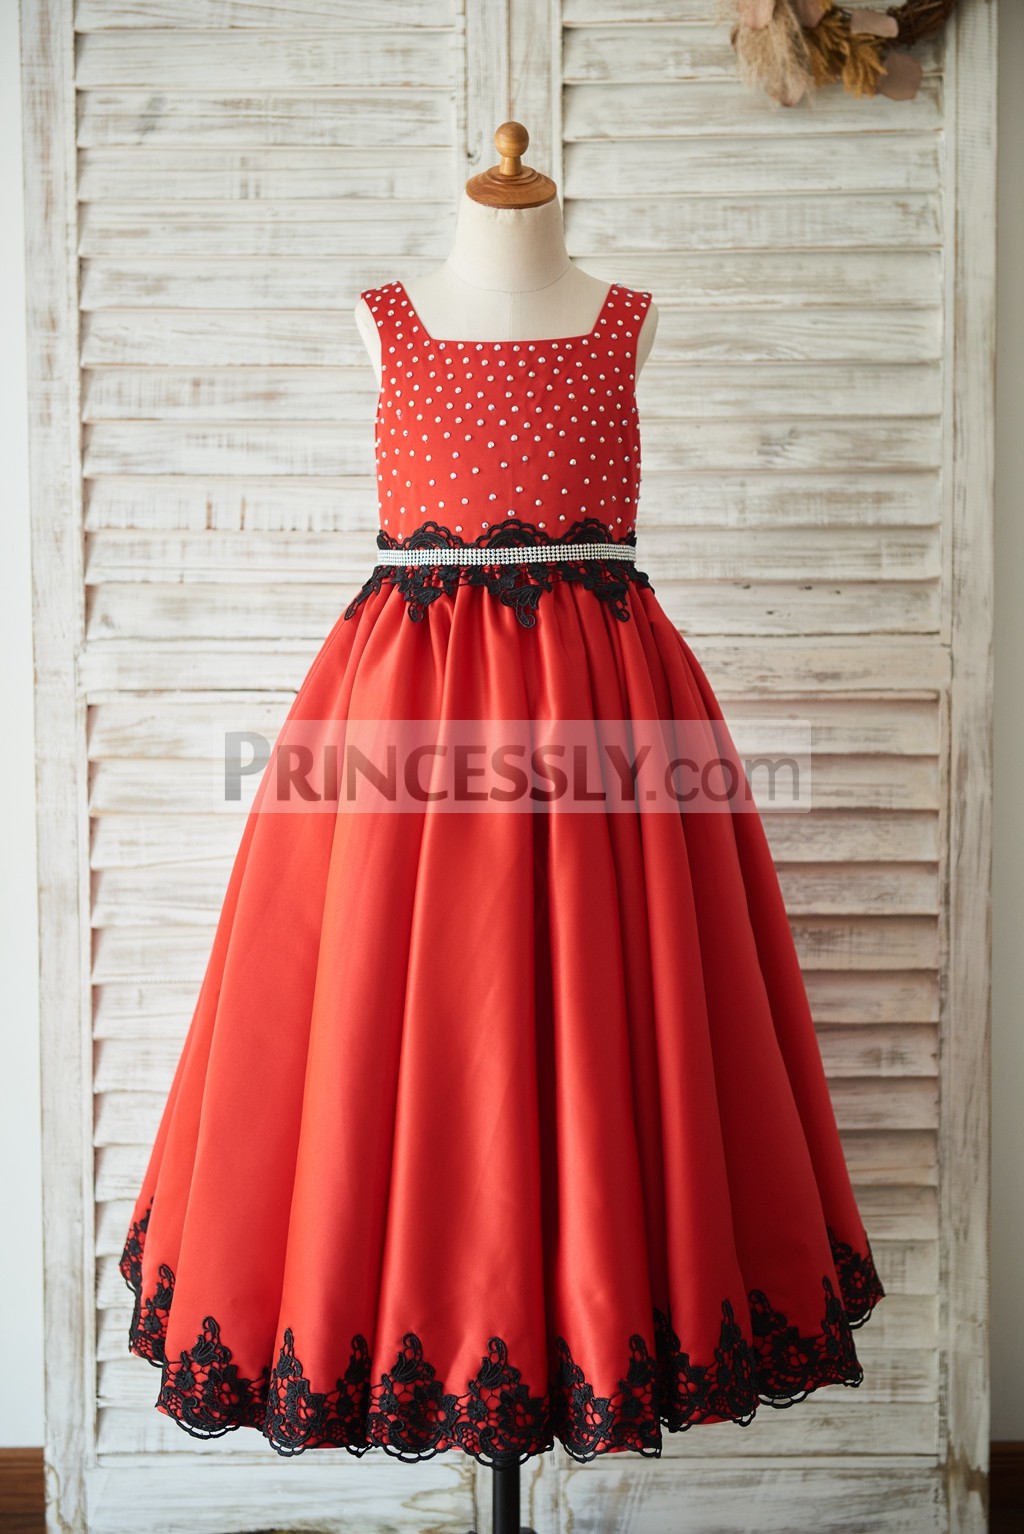 Square neck beaded pleated red satin wedding party flower girl dress